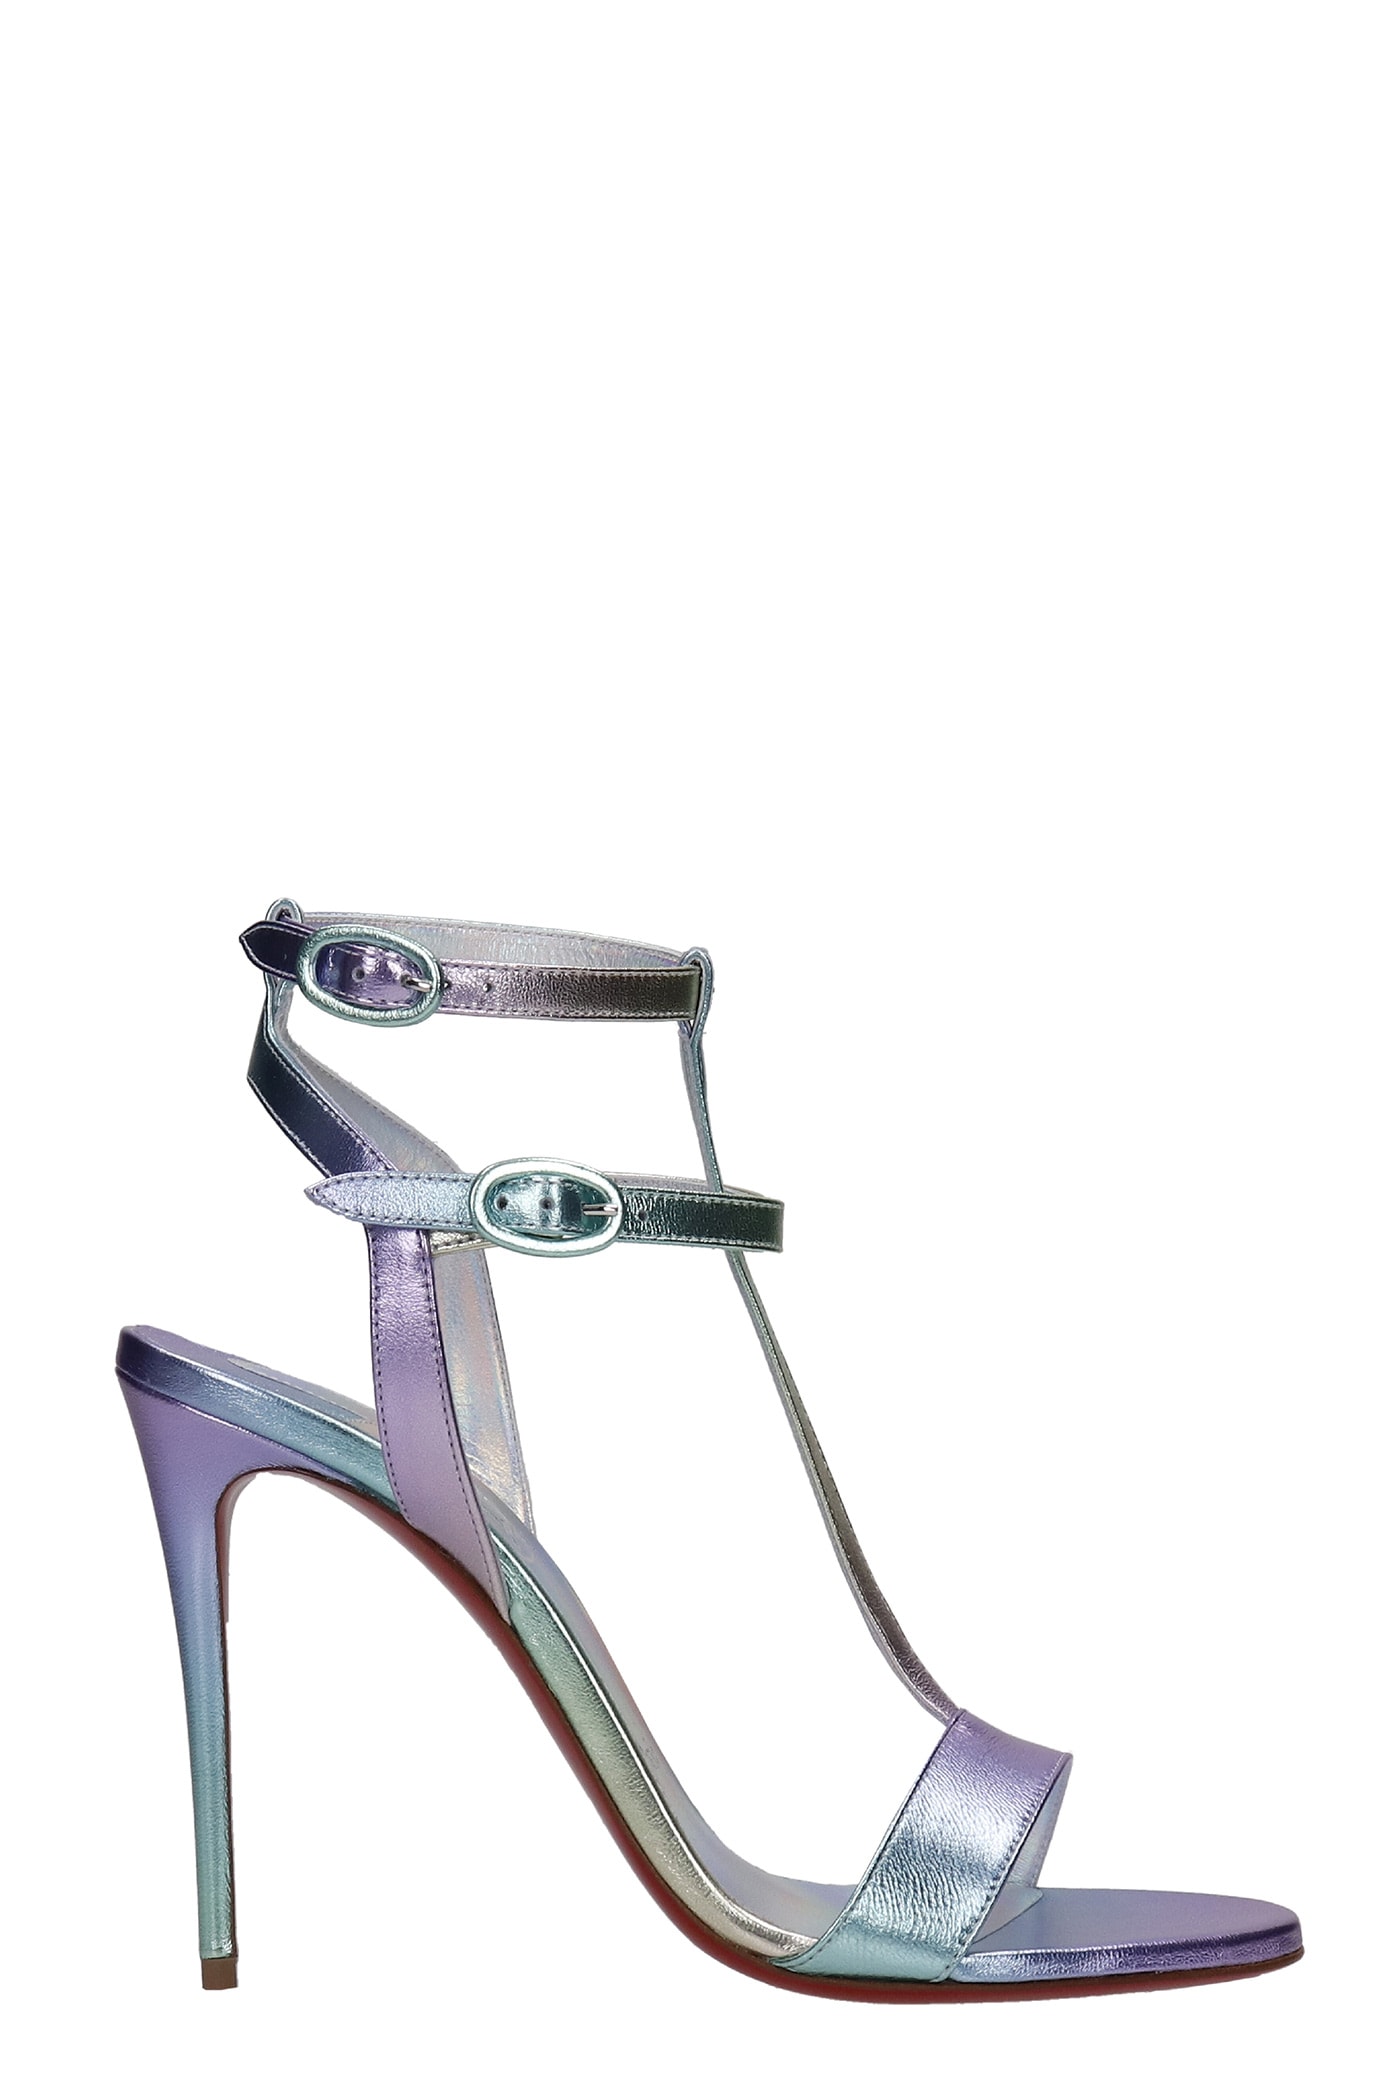 Christian Louboutin Sandals In Multicolor Leather